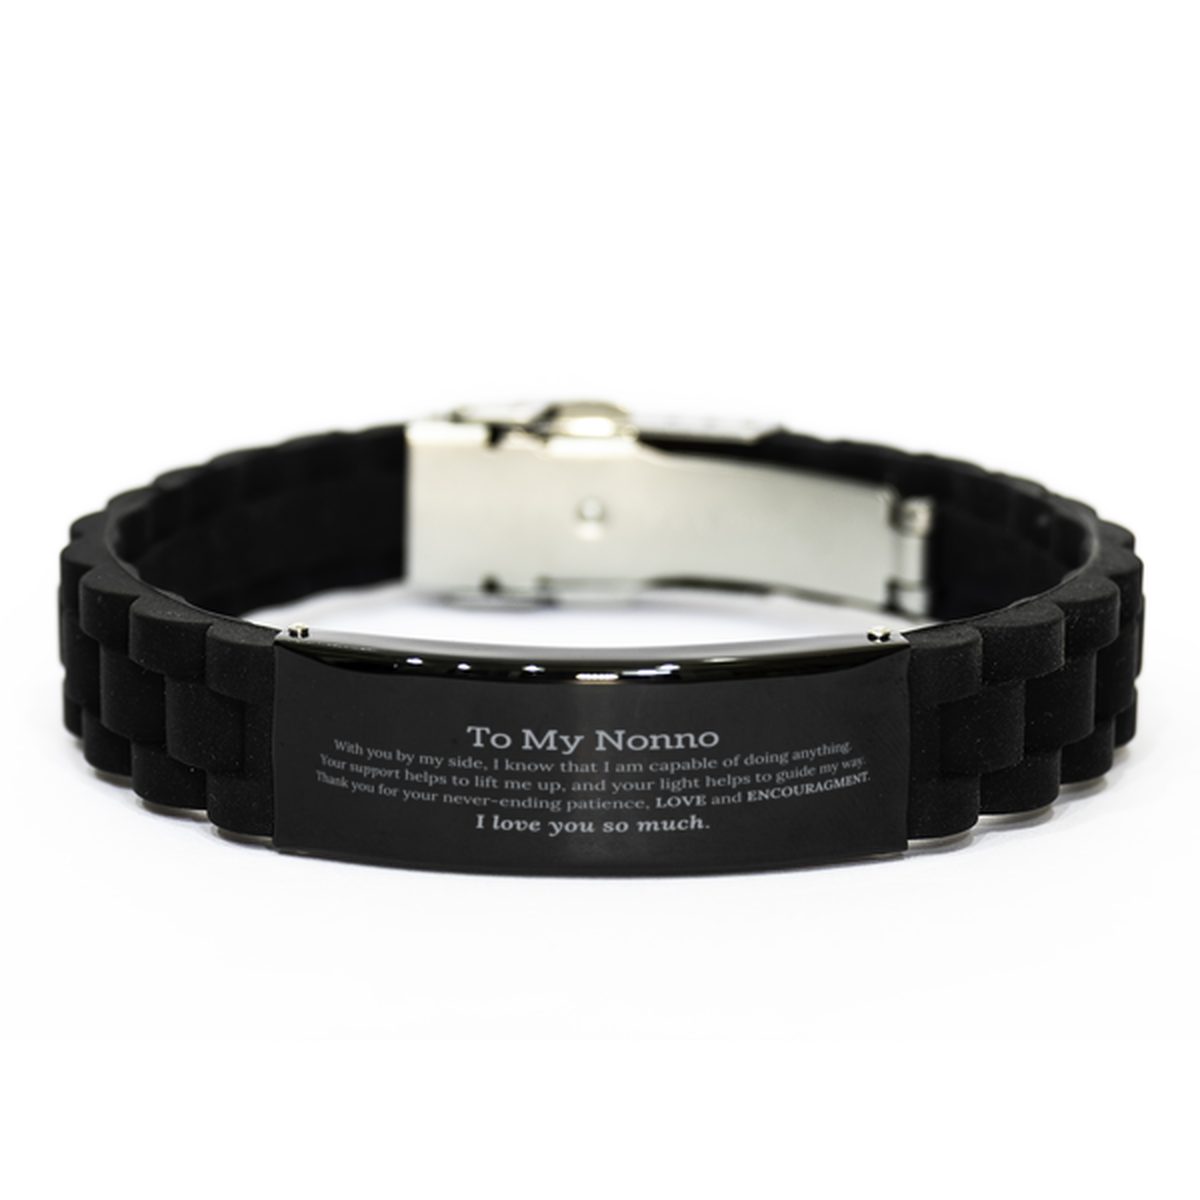 Appreciation Nonno Black Glidelock Clasp Bracelet Gifts, To My Nonno Birthday Christmas Wedding Keepsake Gifts for Nonno With you by my side, I know that I am capable of doing anything. I love you so much